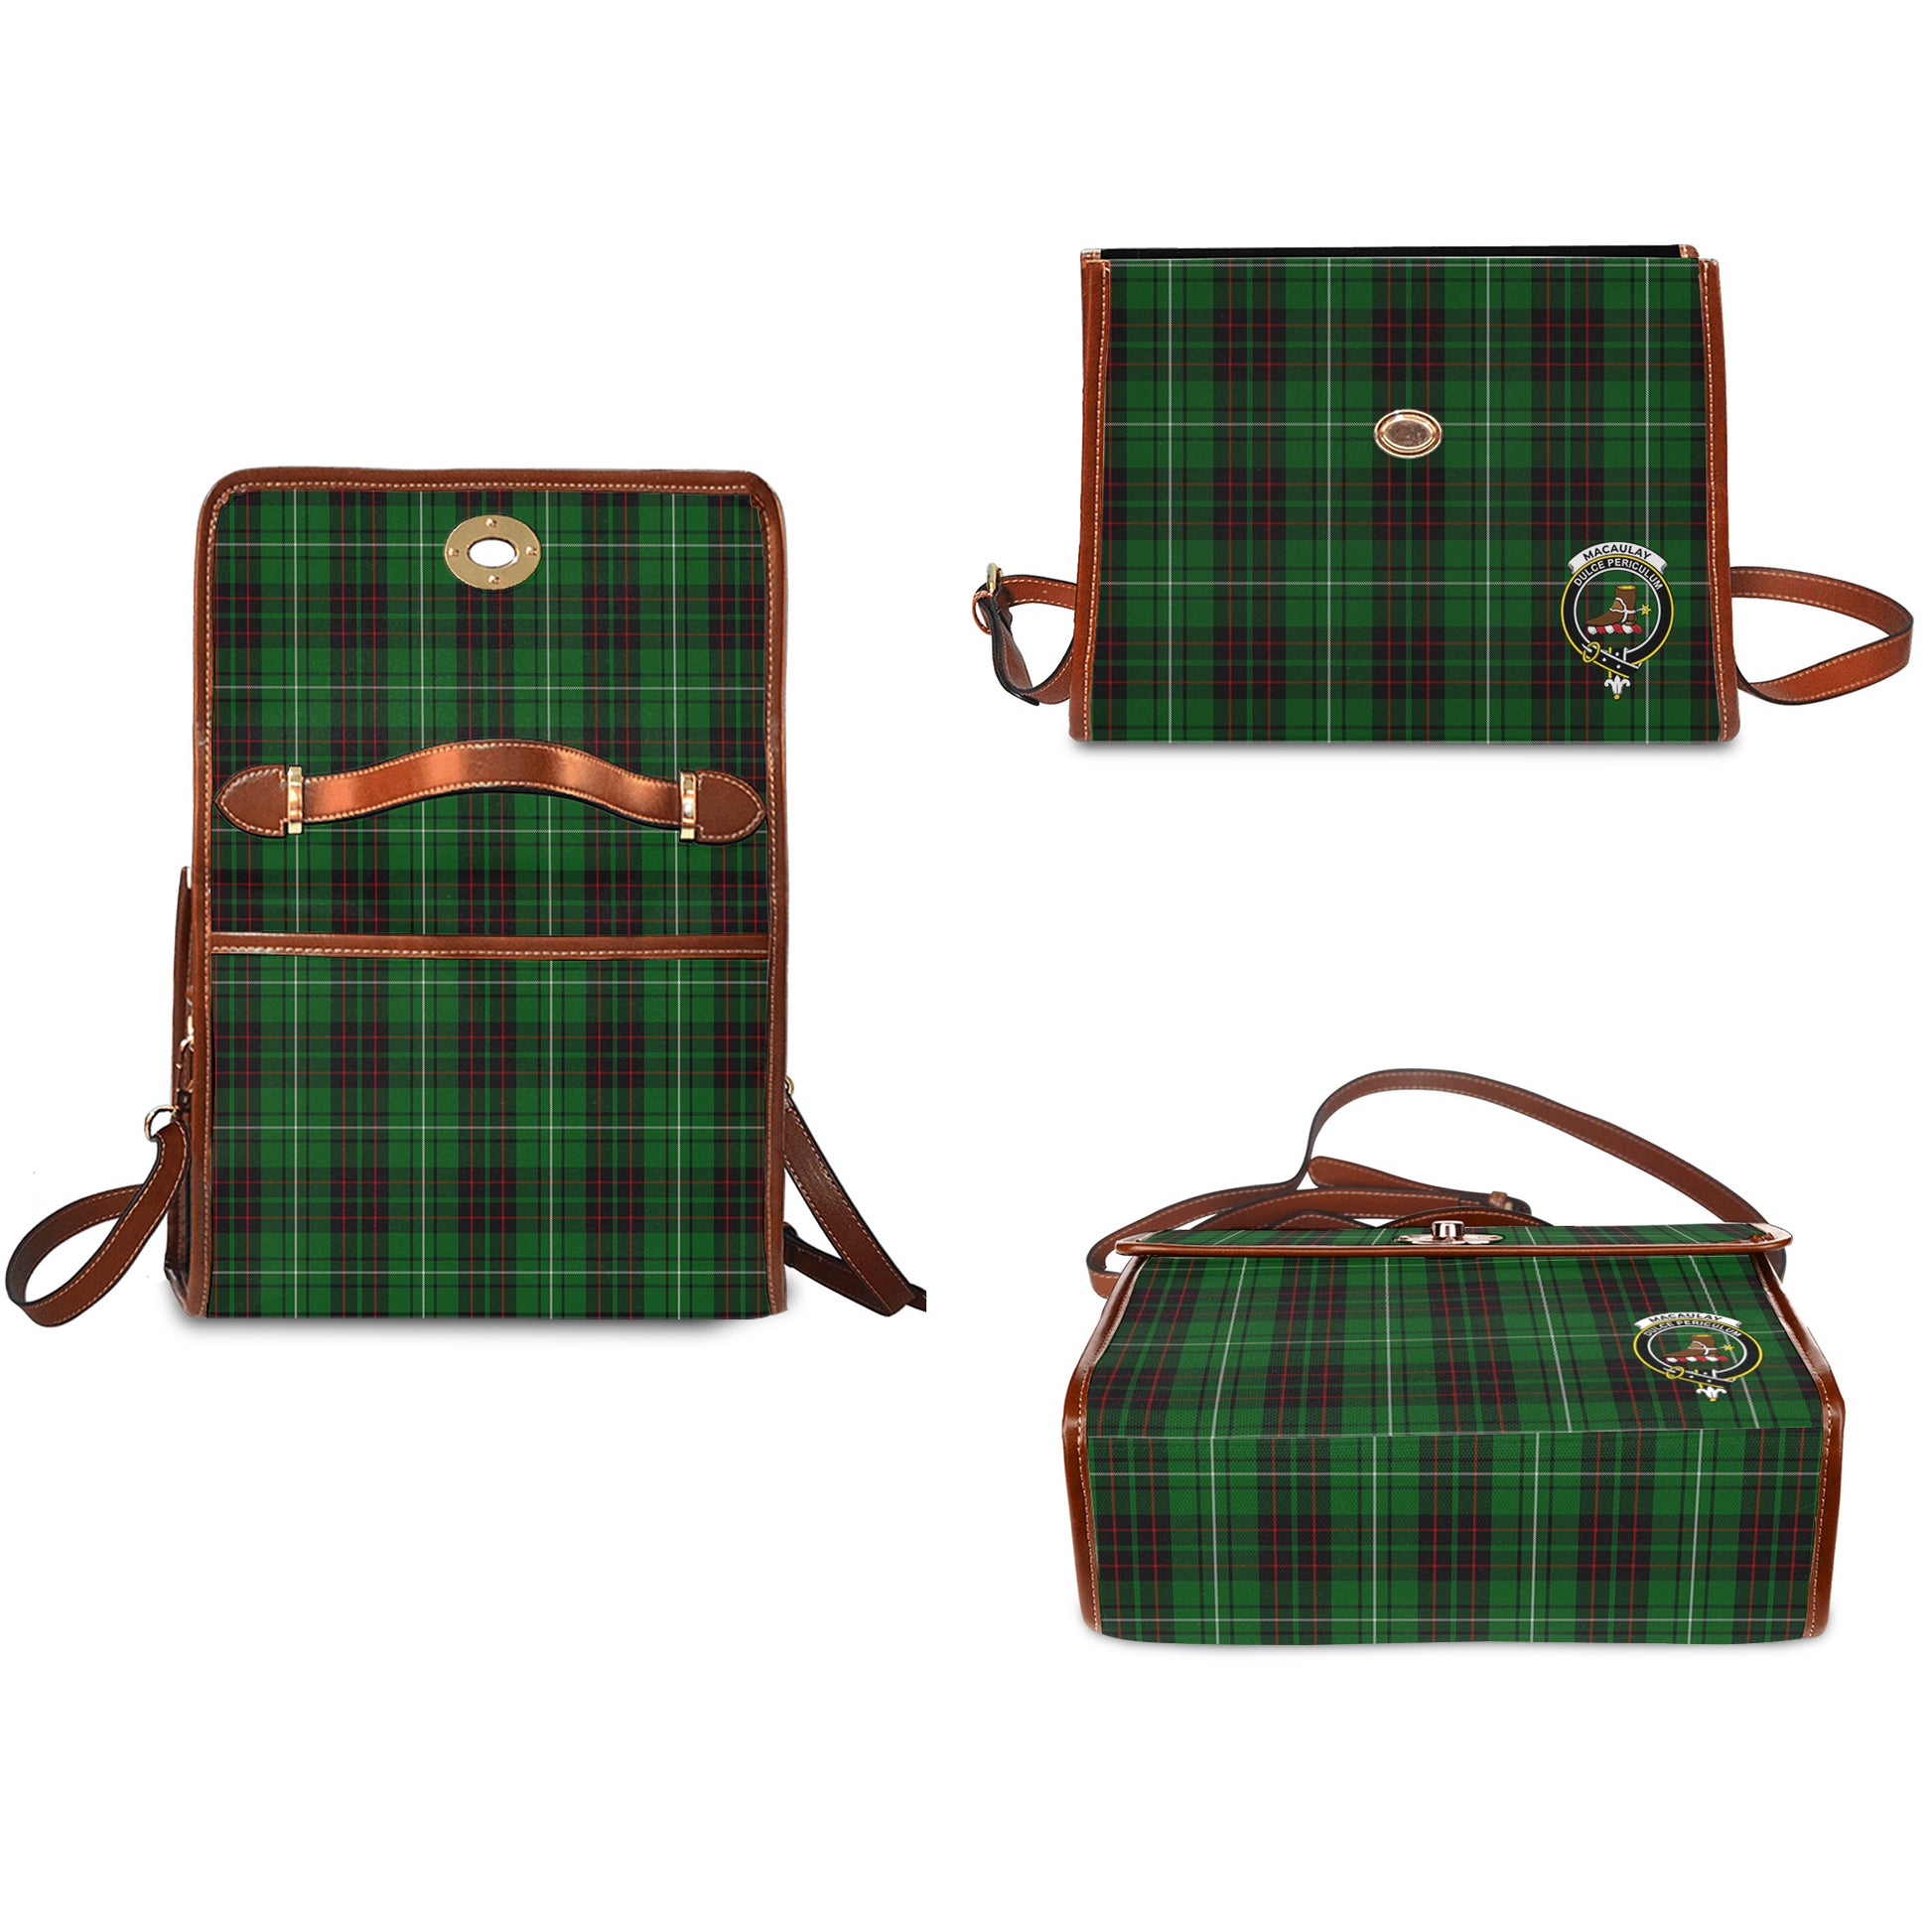 macaulay-of-lewis-tartan-leather-strap-waterproof-canvas-bag-with-family-crest